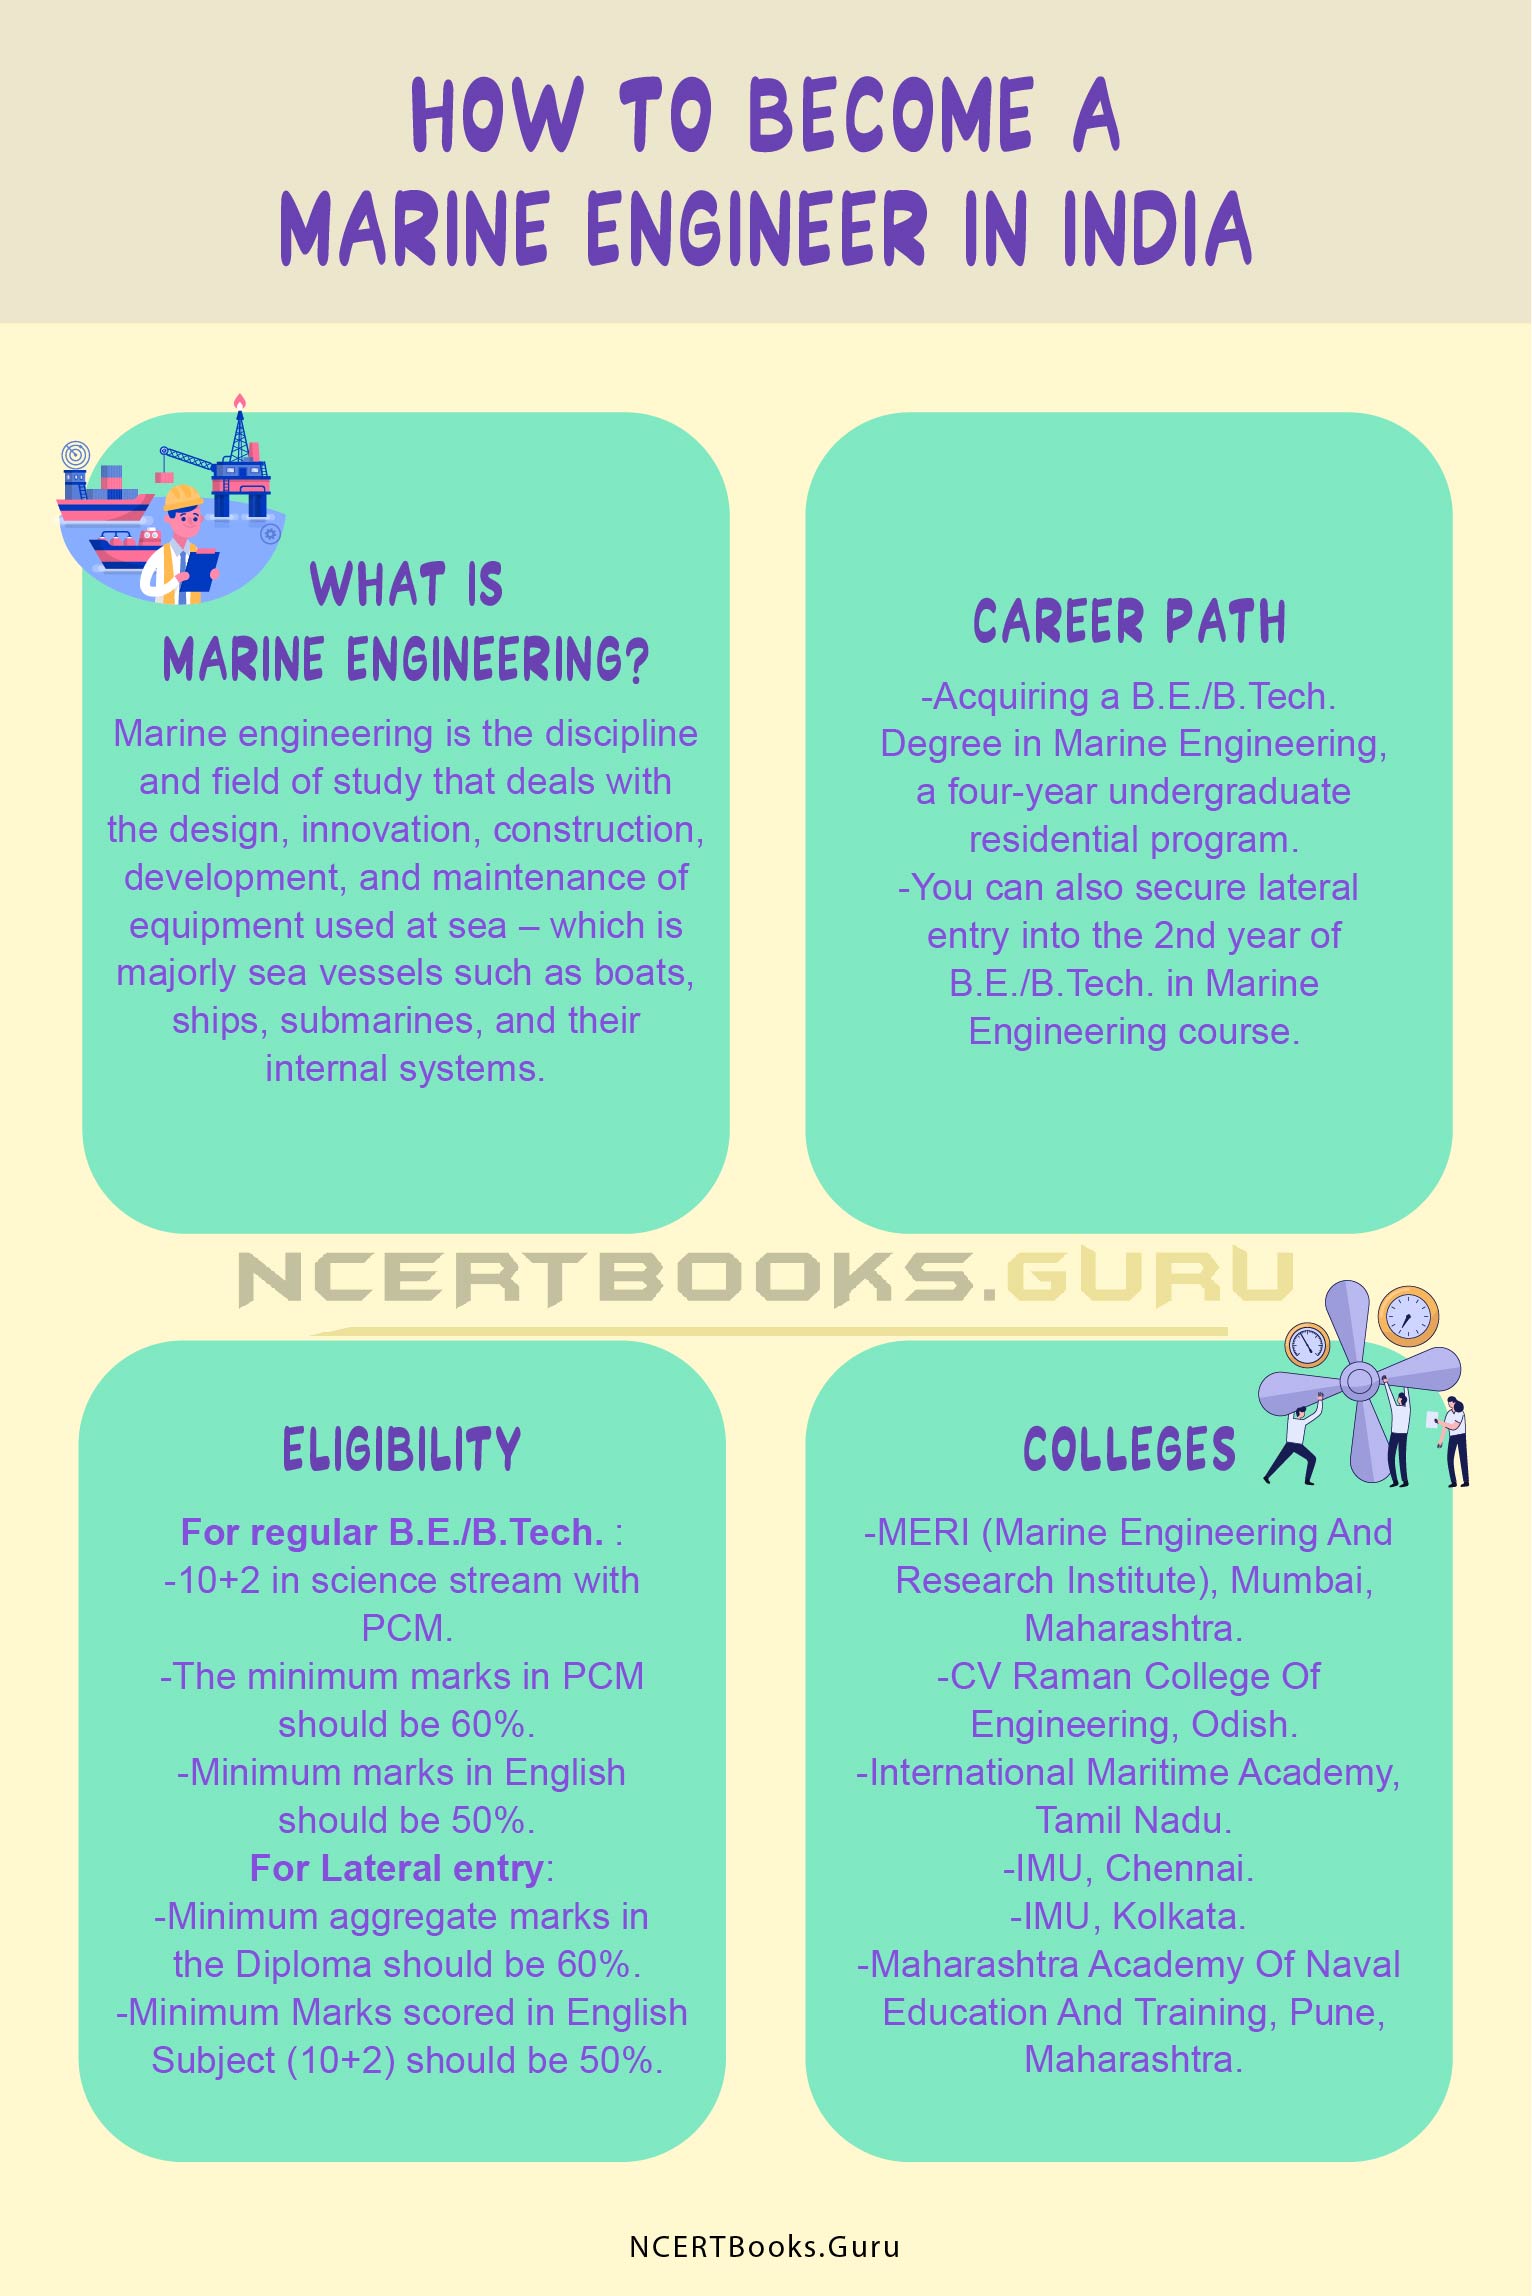 How to become a Marine Engineer in India